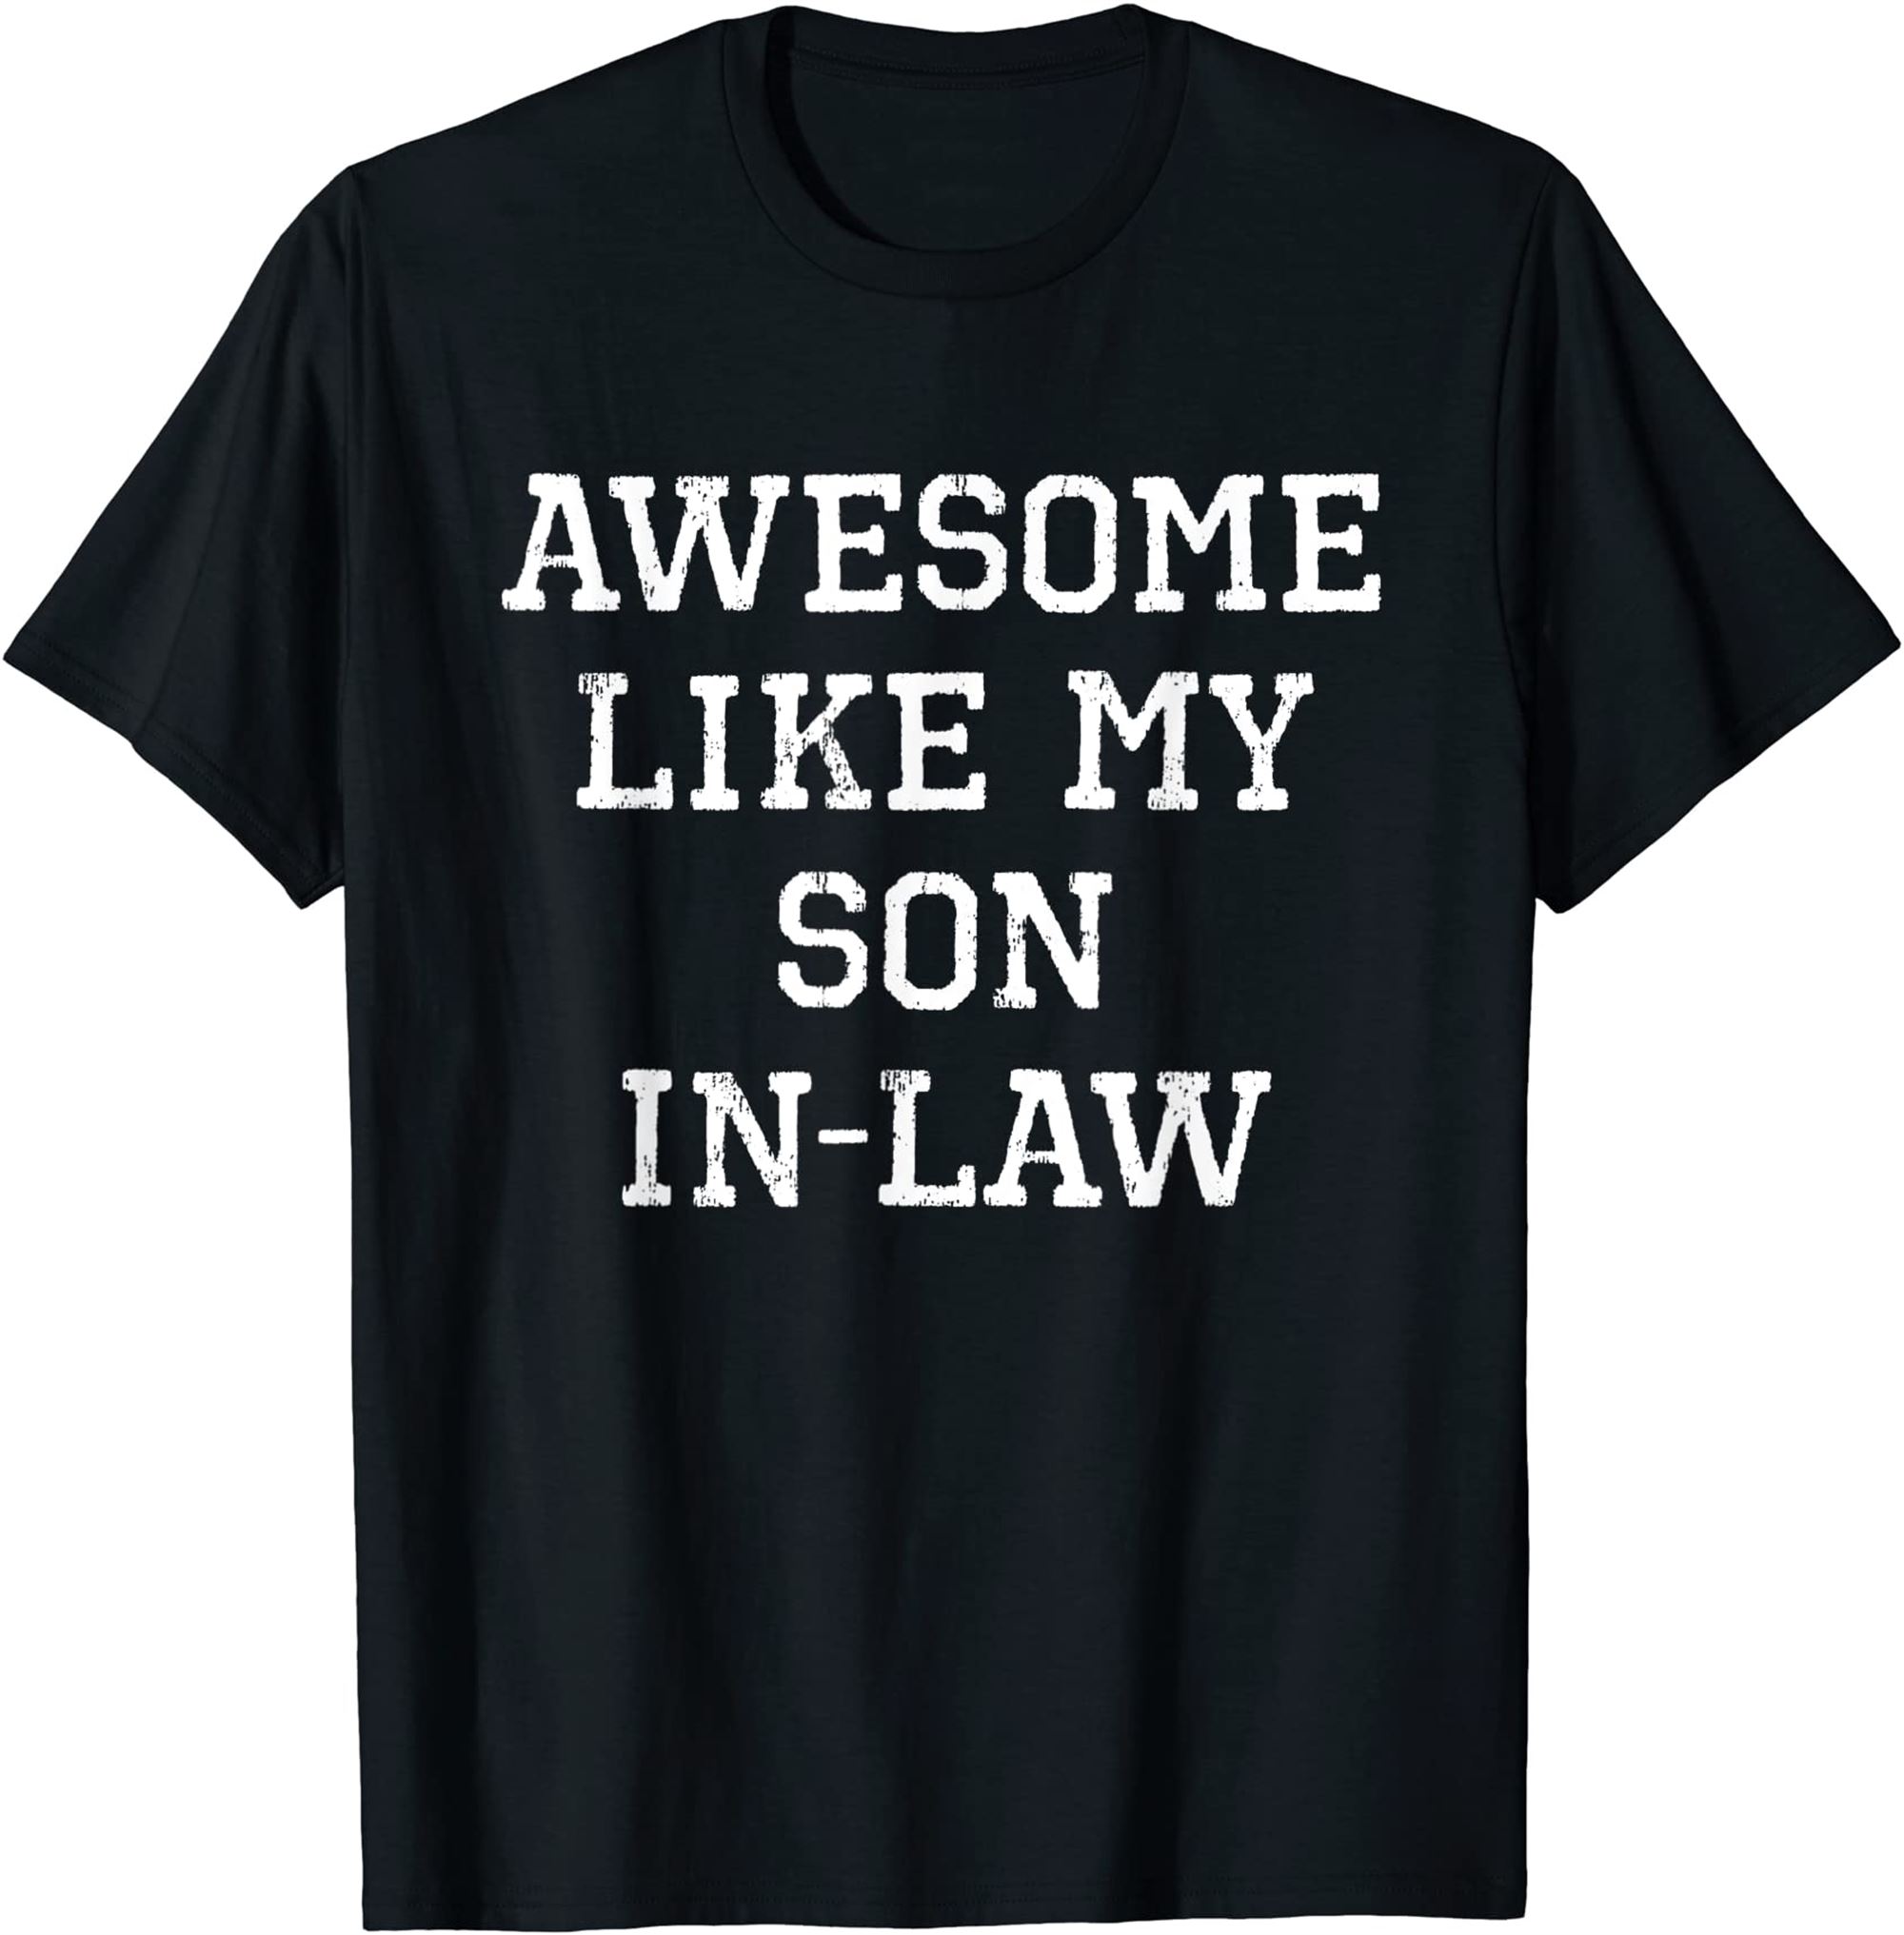 Awesome Like My Son In Law Funny Father Mother Gift Tshirt Full Size Up To 5xl